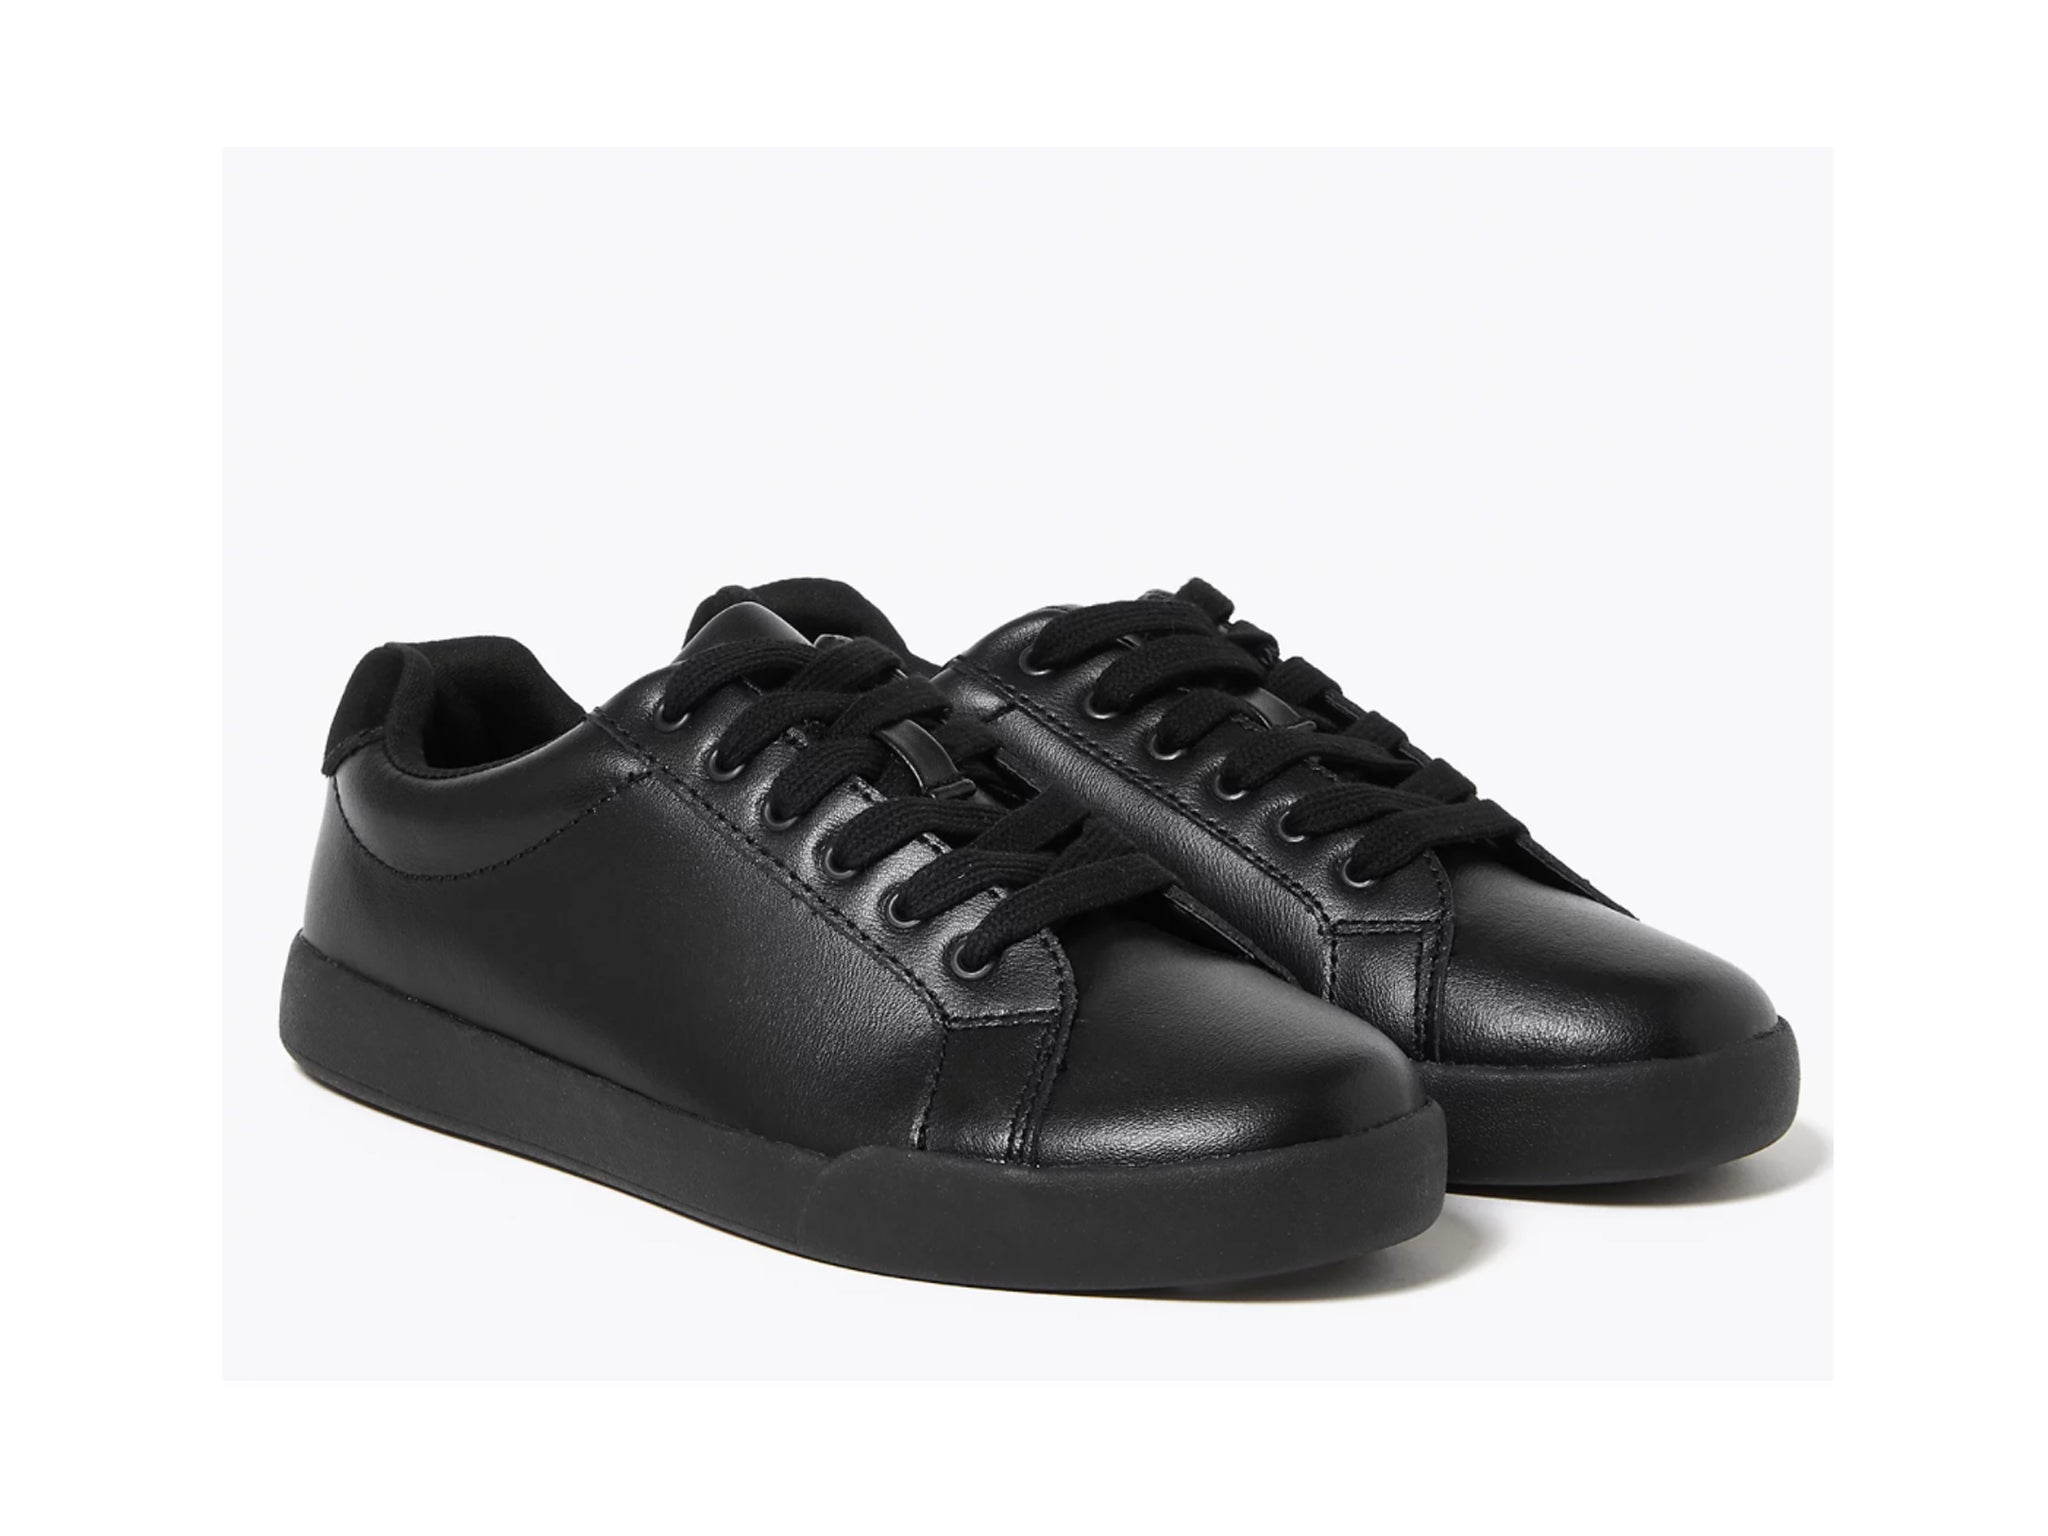 KICKERS GIRLS BLACK PATENT LEATHER SHOES UK SIZES 3,4,5,6 SCHOOL  WORK NEW STYLE